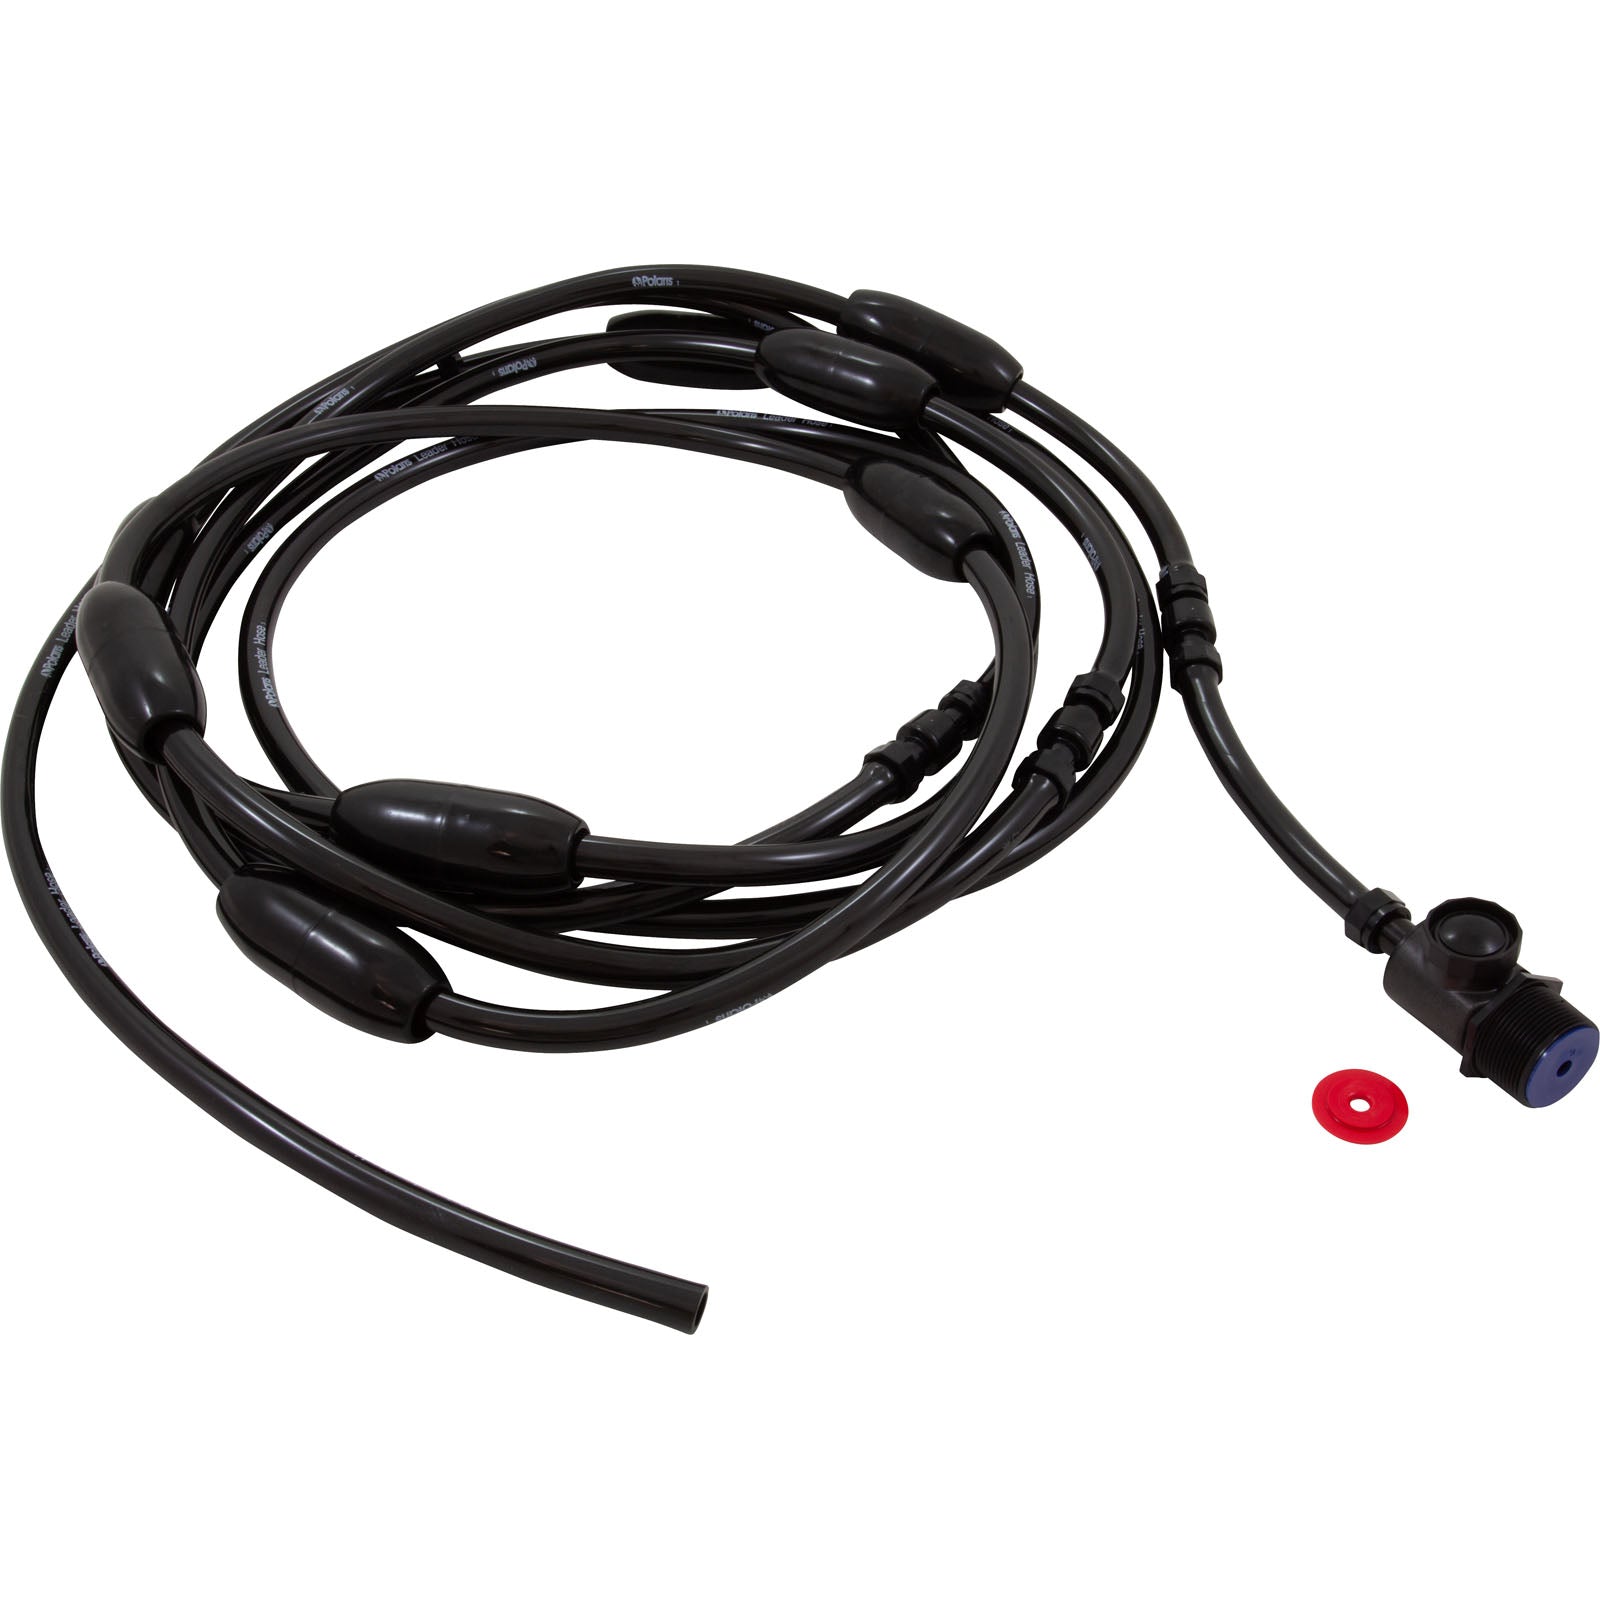 Zodiac/Polaris G6 Black Complete Feed Hose with UWF for Polaris 280/380 Pool Cleaners